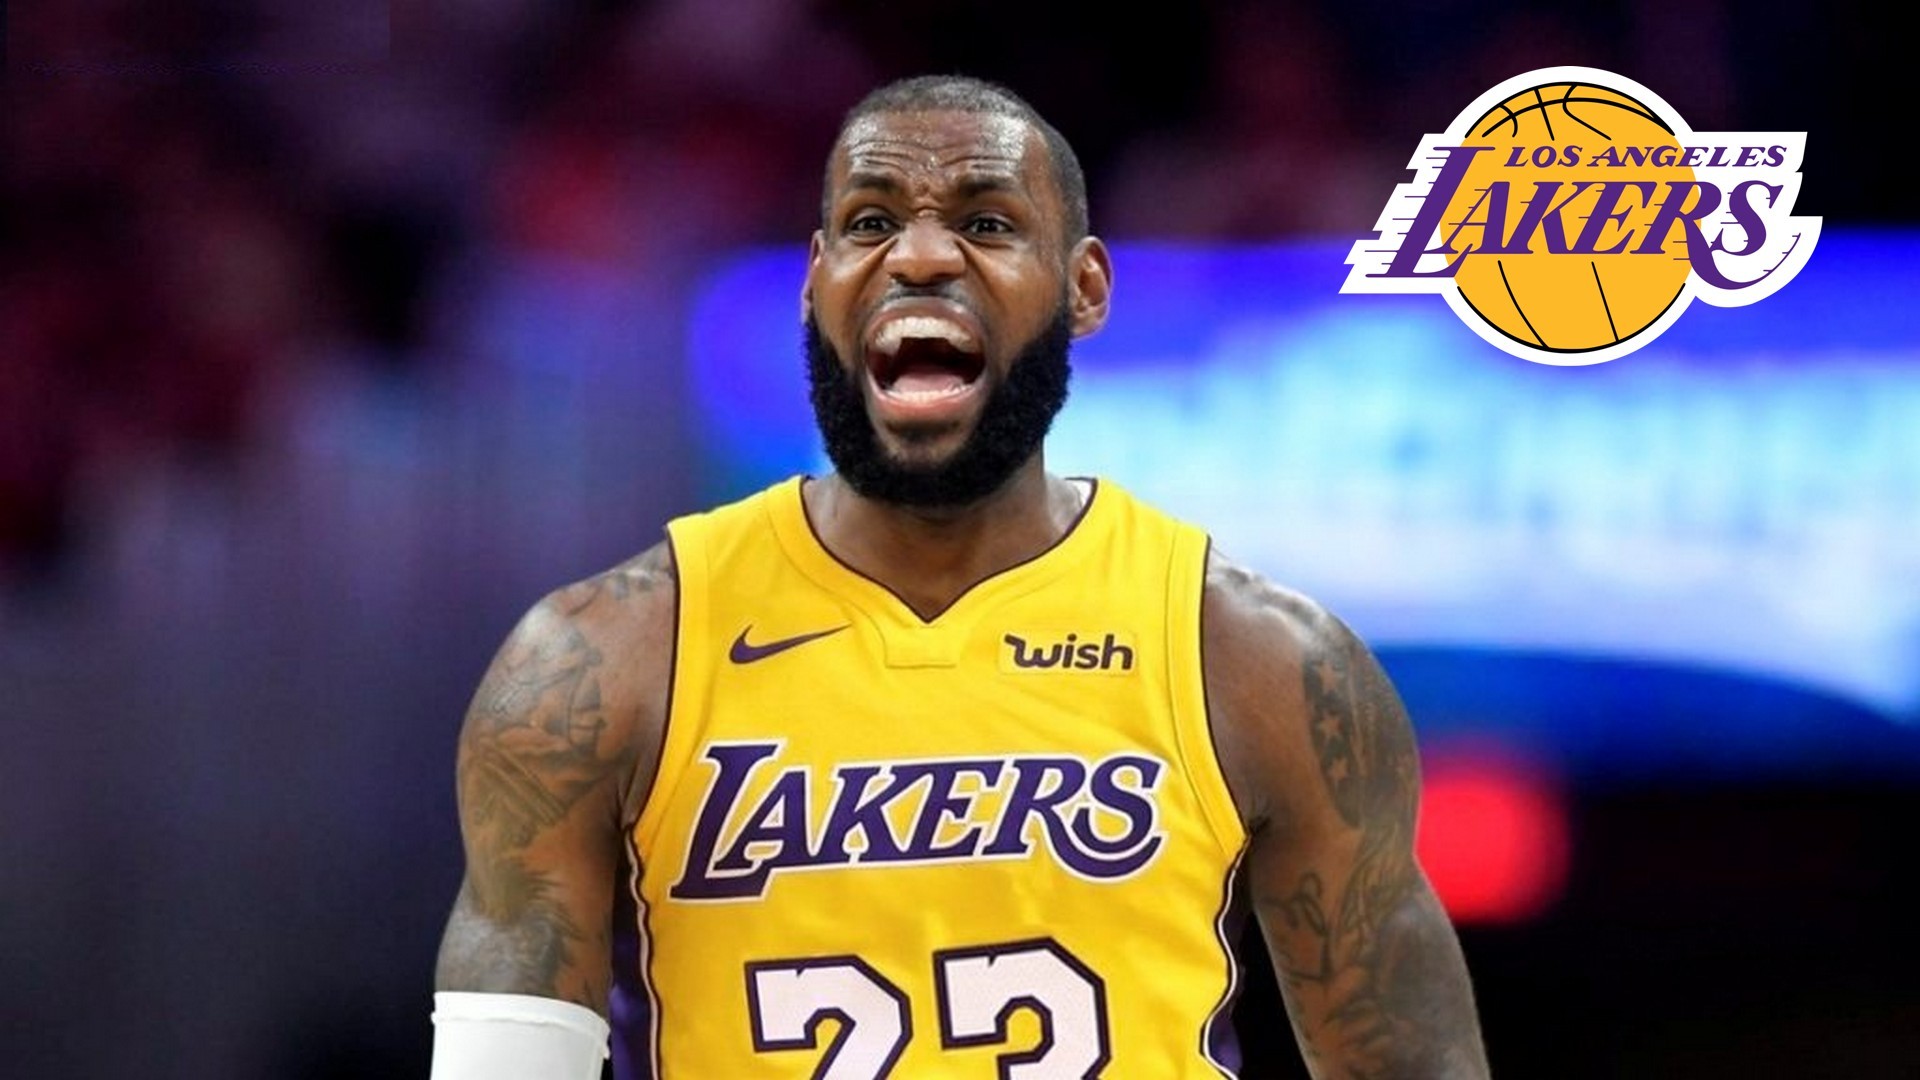 1920x1080 Angry Lebron James On Lakers 23 Jersey Hd Wallpaper Download